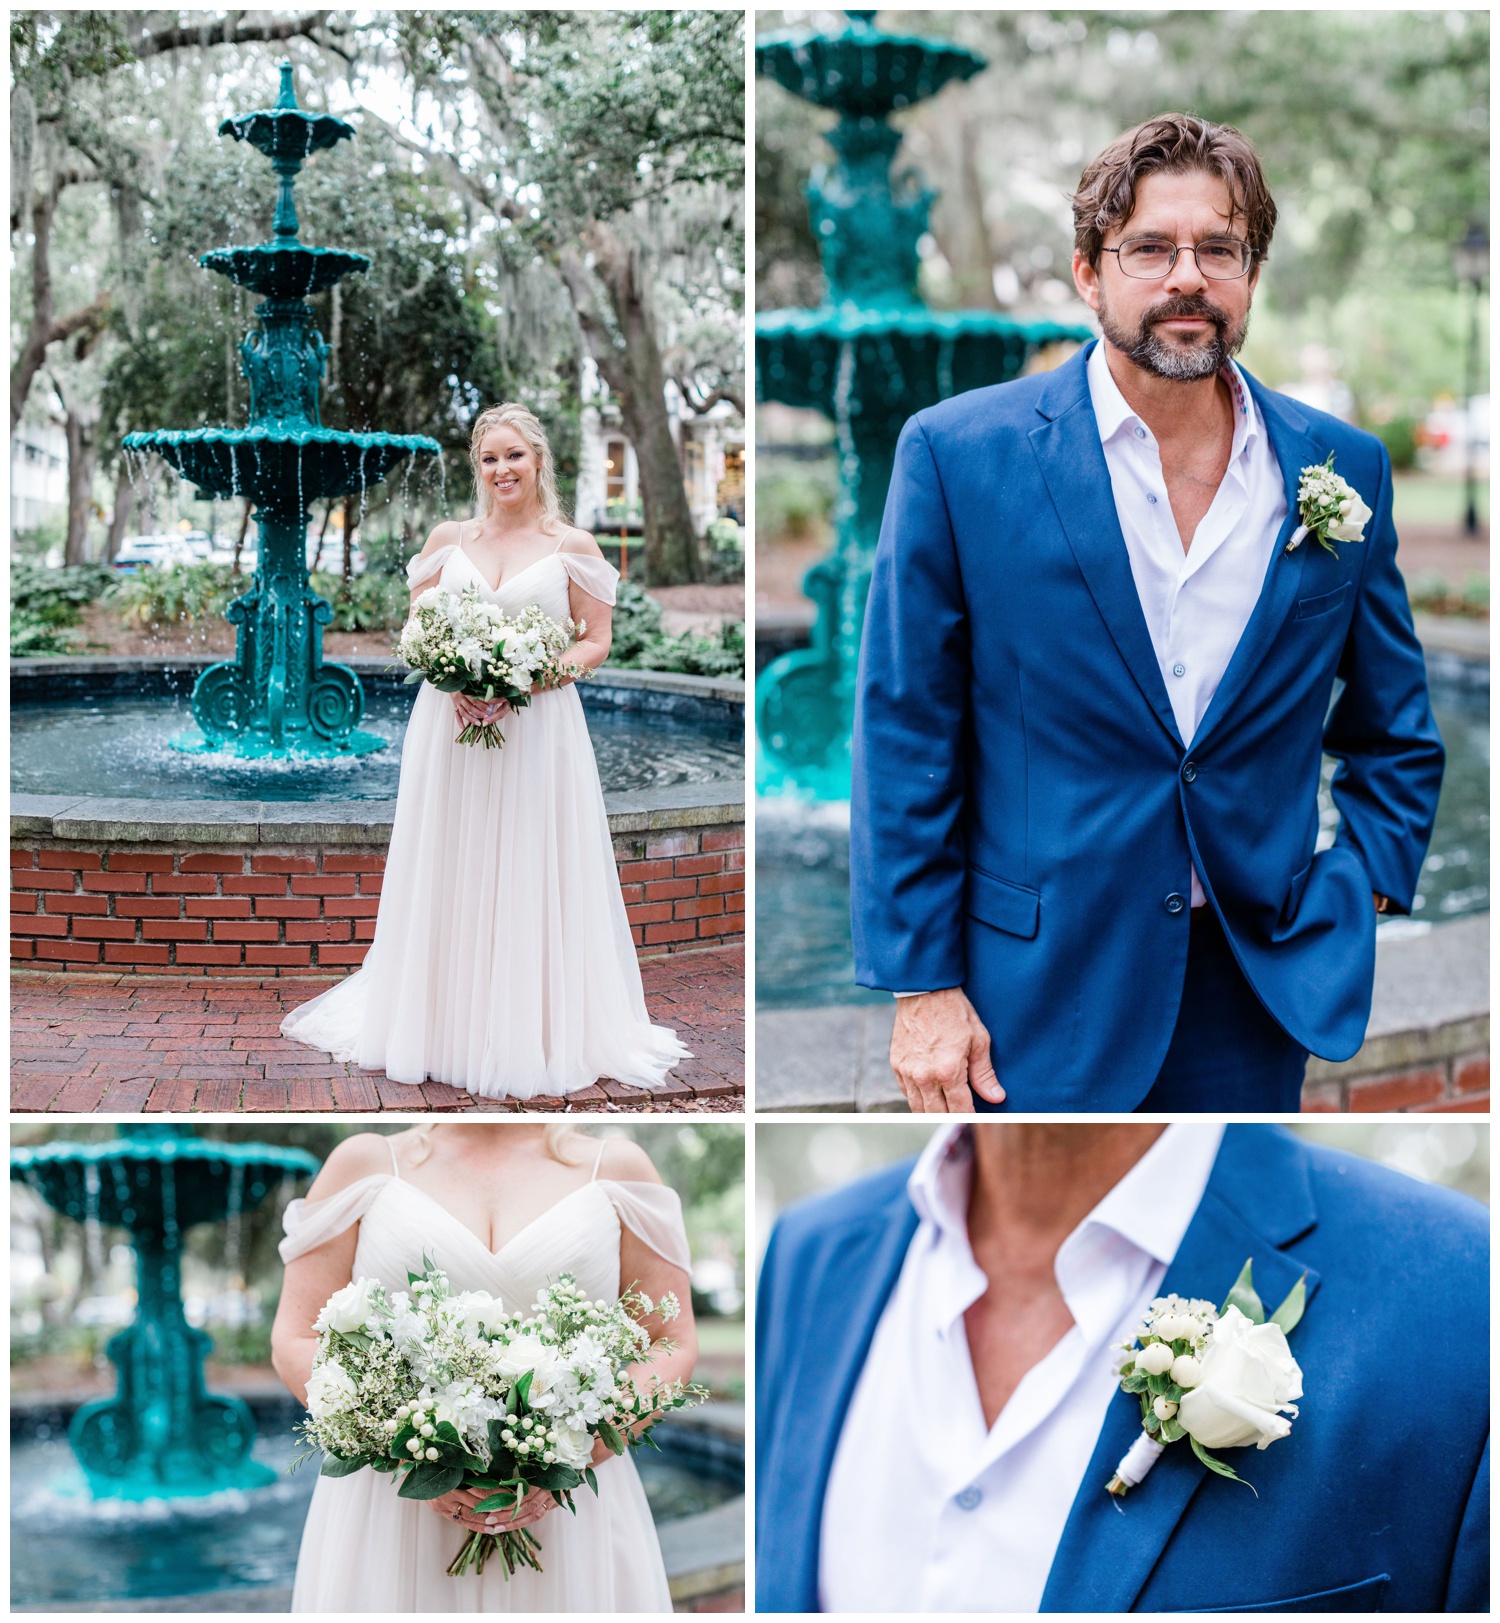 Couples portraits by Apt B Photography of The Savannah Elopement Package, flowers by Ivory and Beau